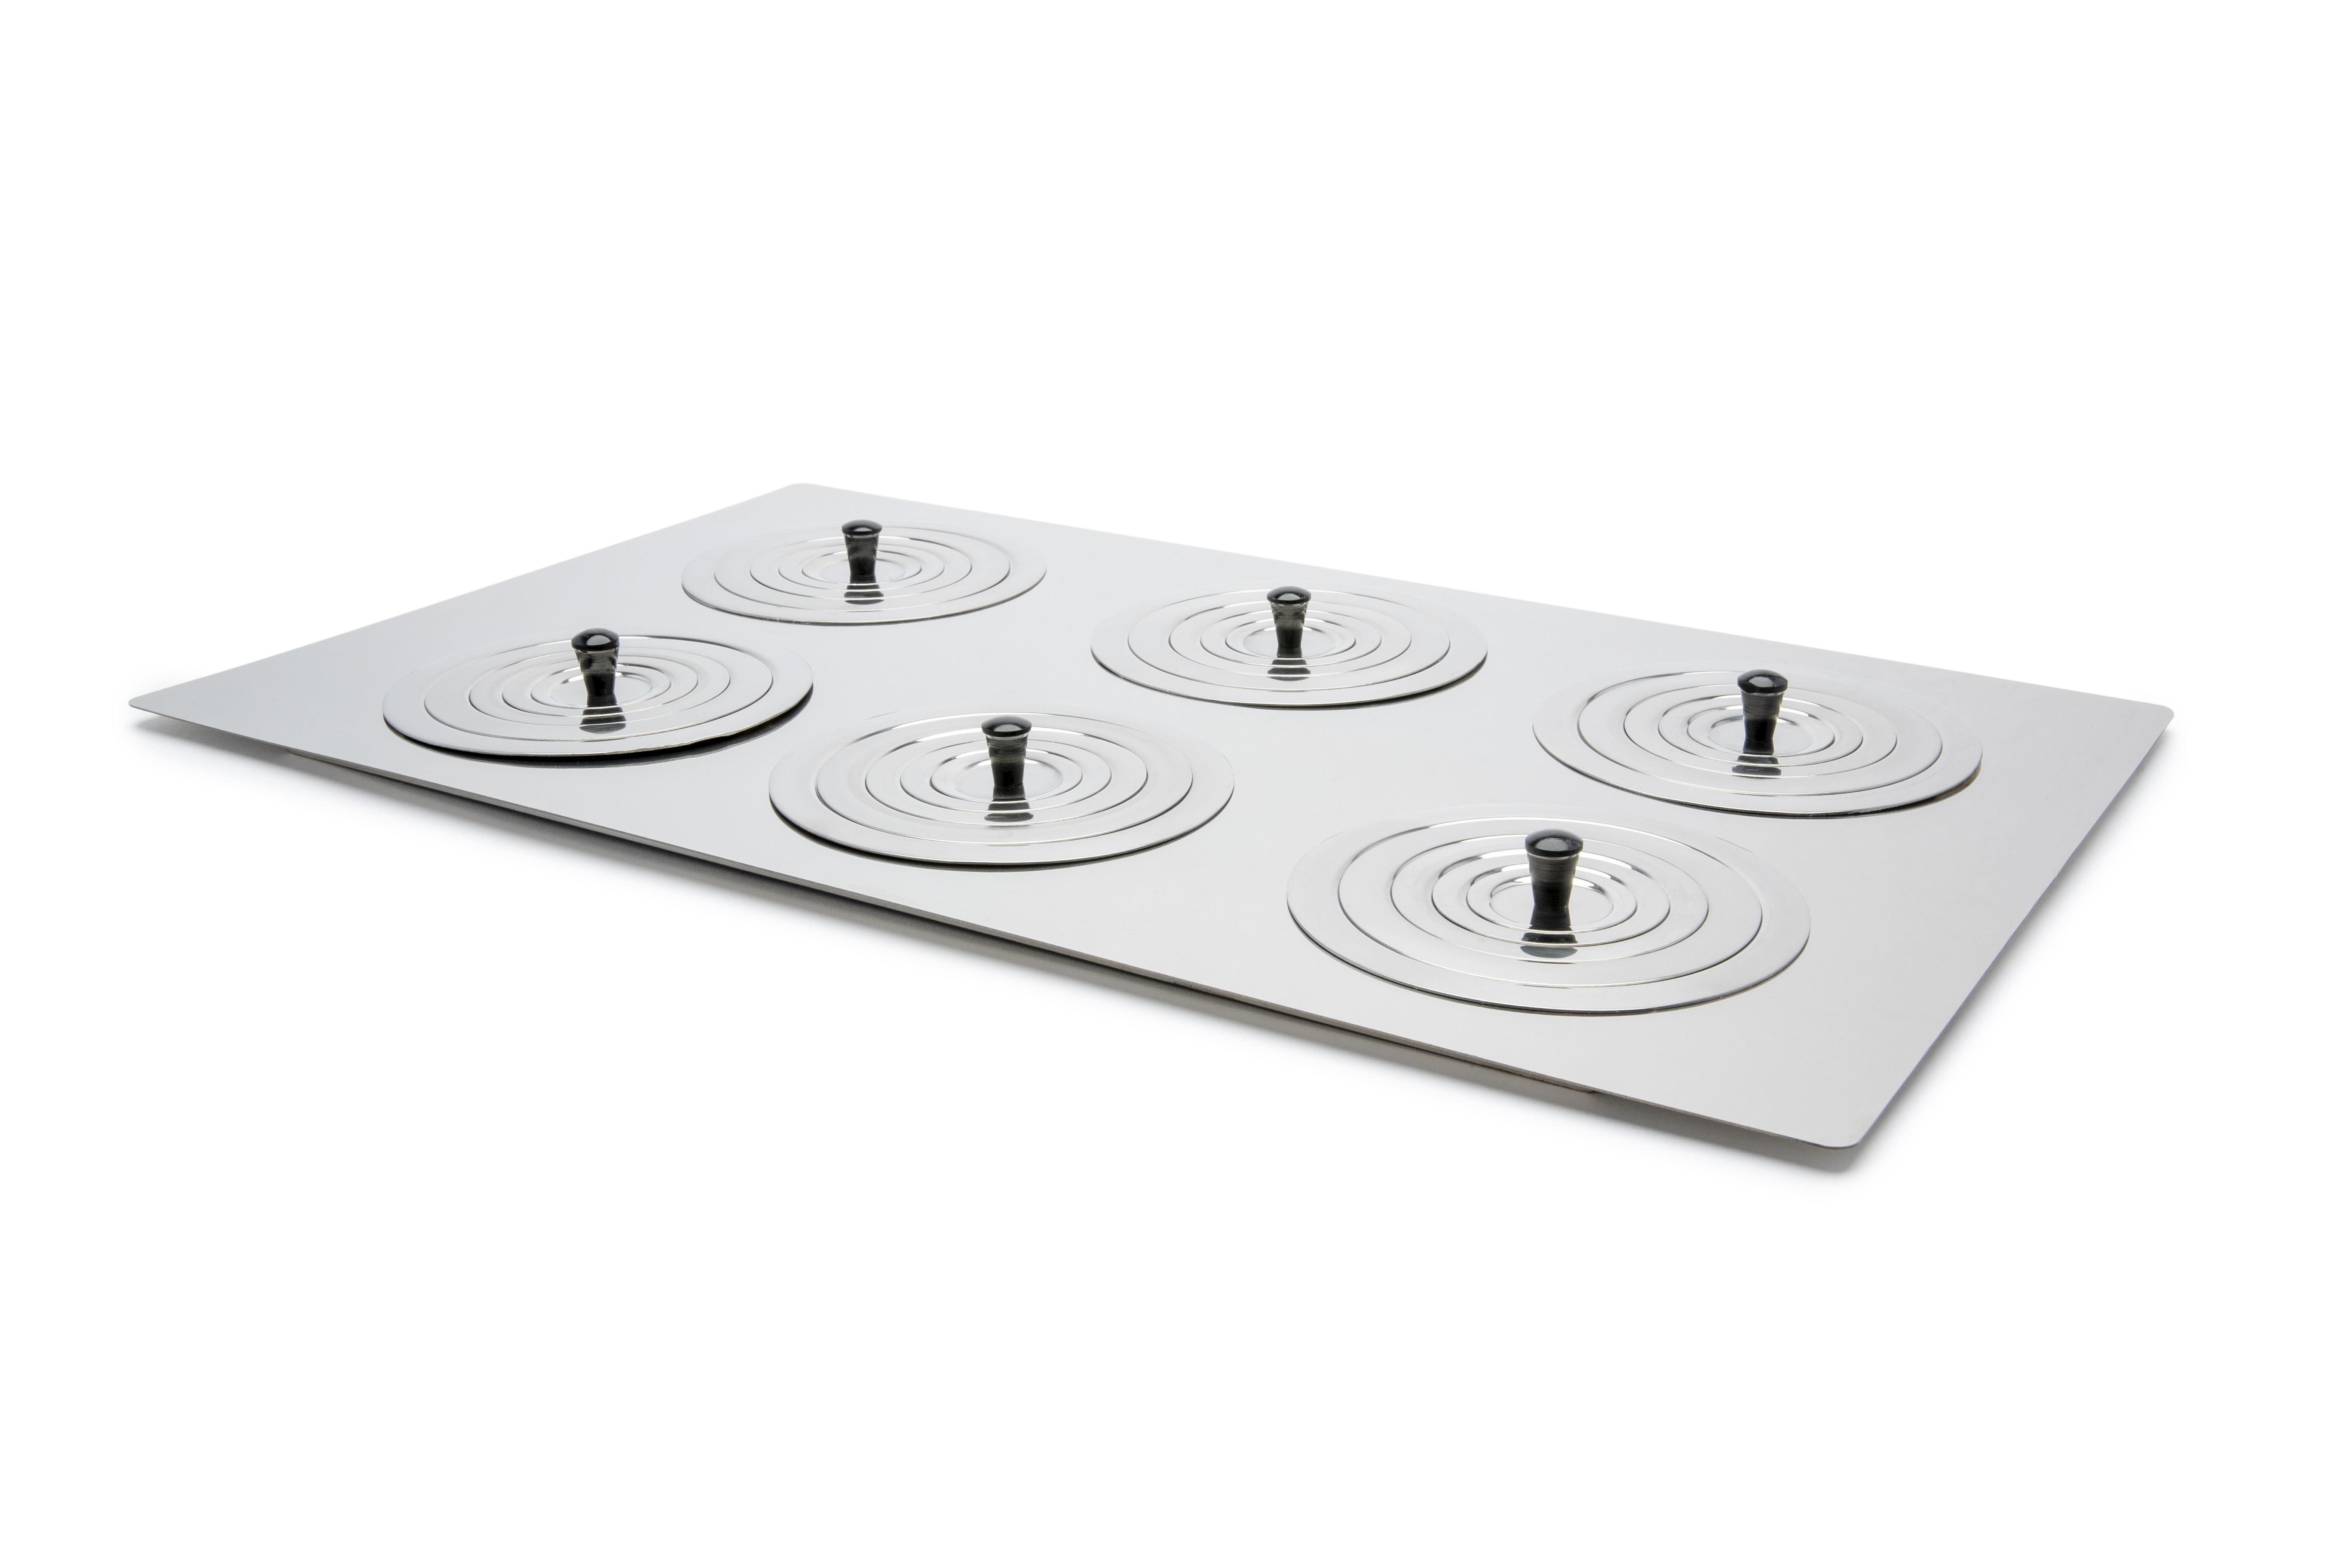 LF28 - Grant Instruments Stainless Steel Flat Lid With Ring Sets For Unstirred Water Baths